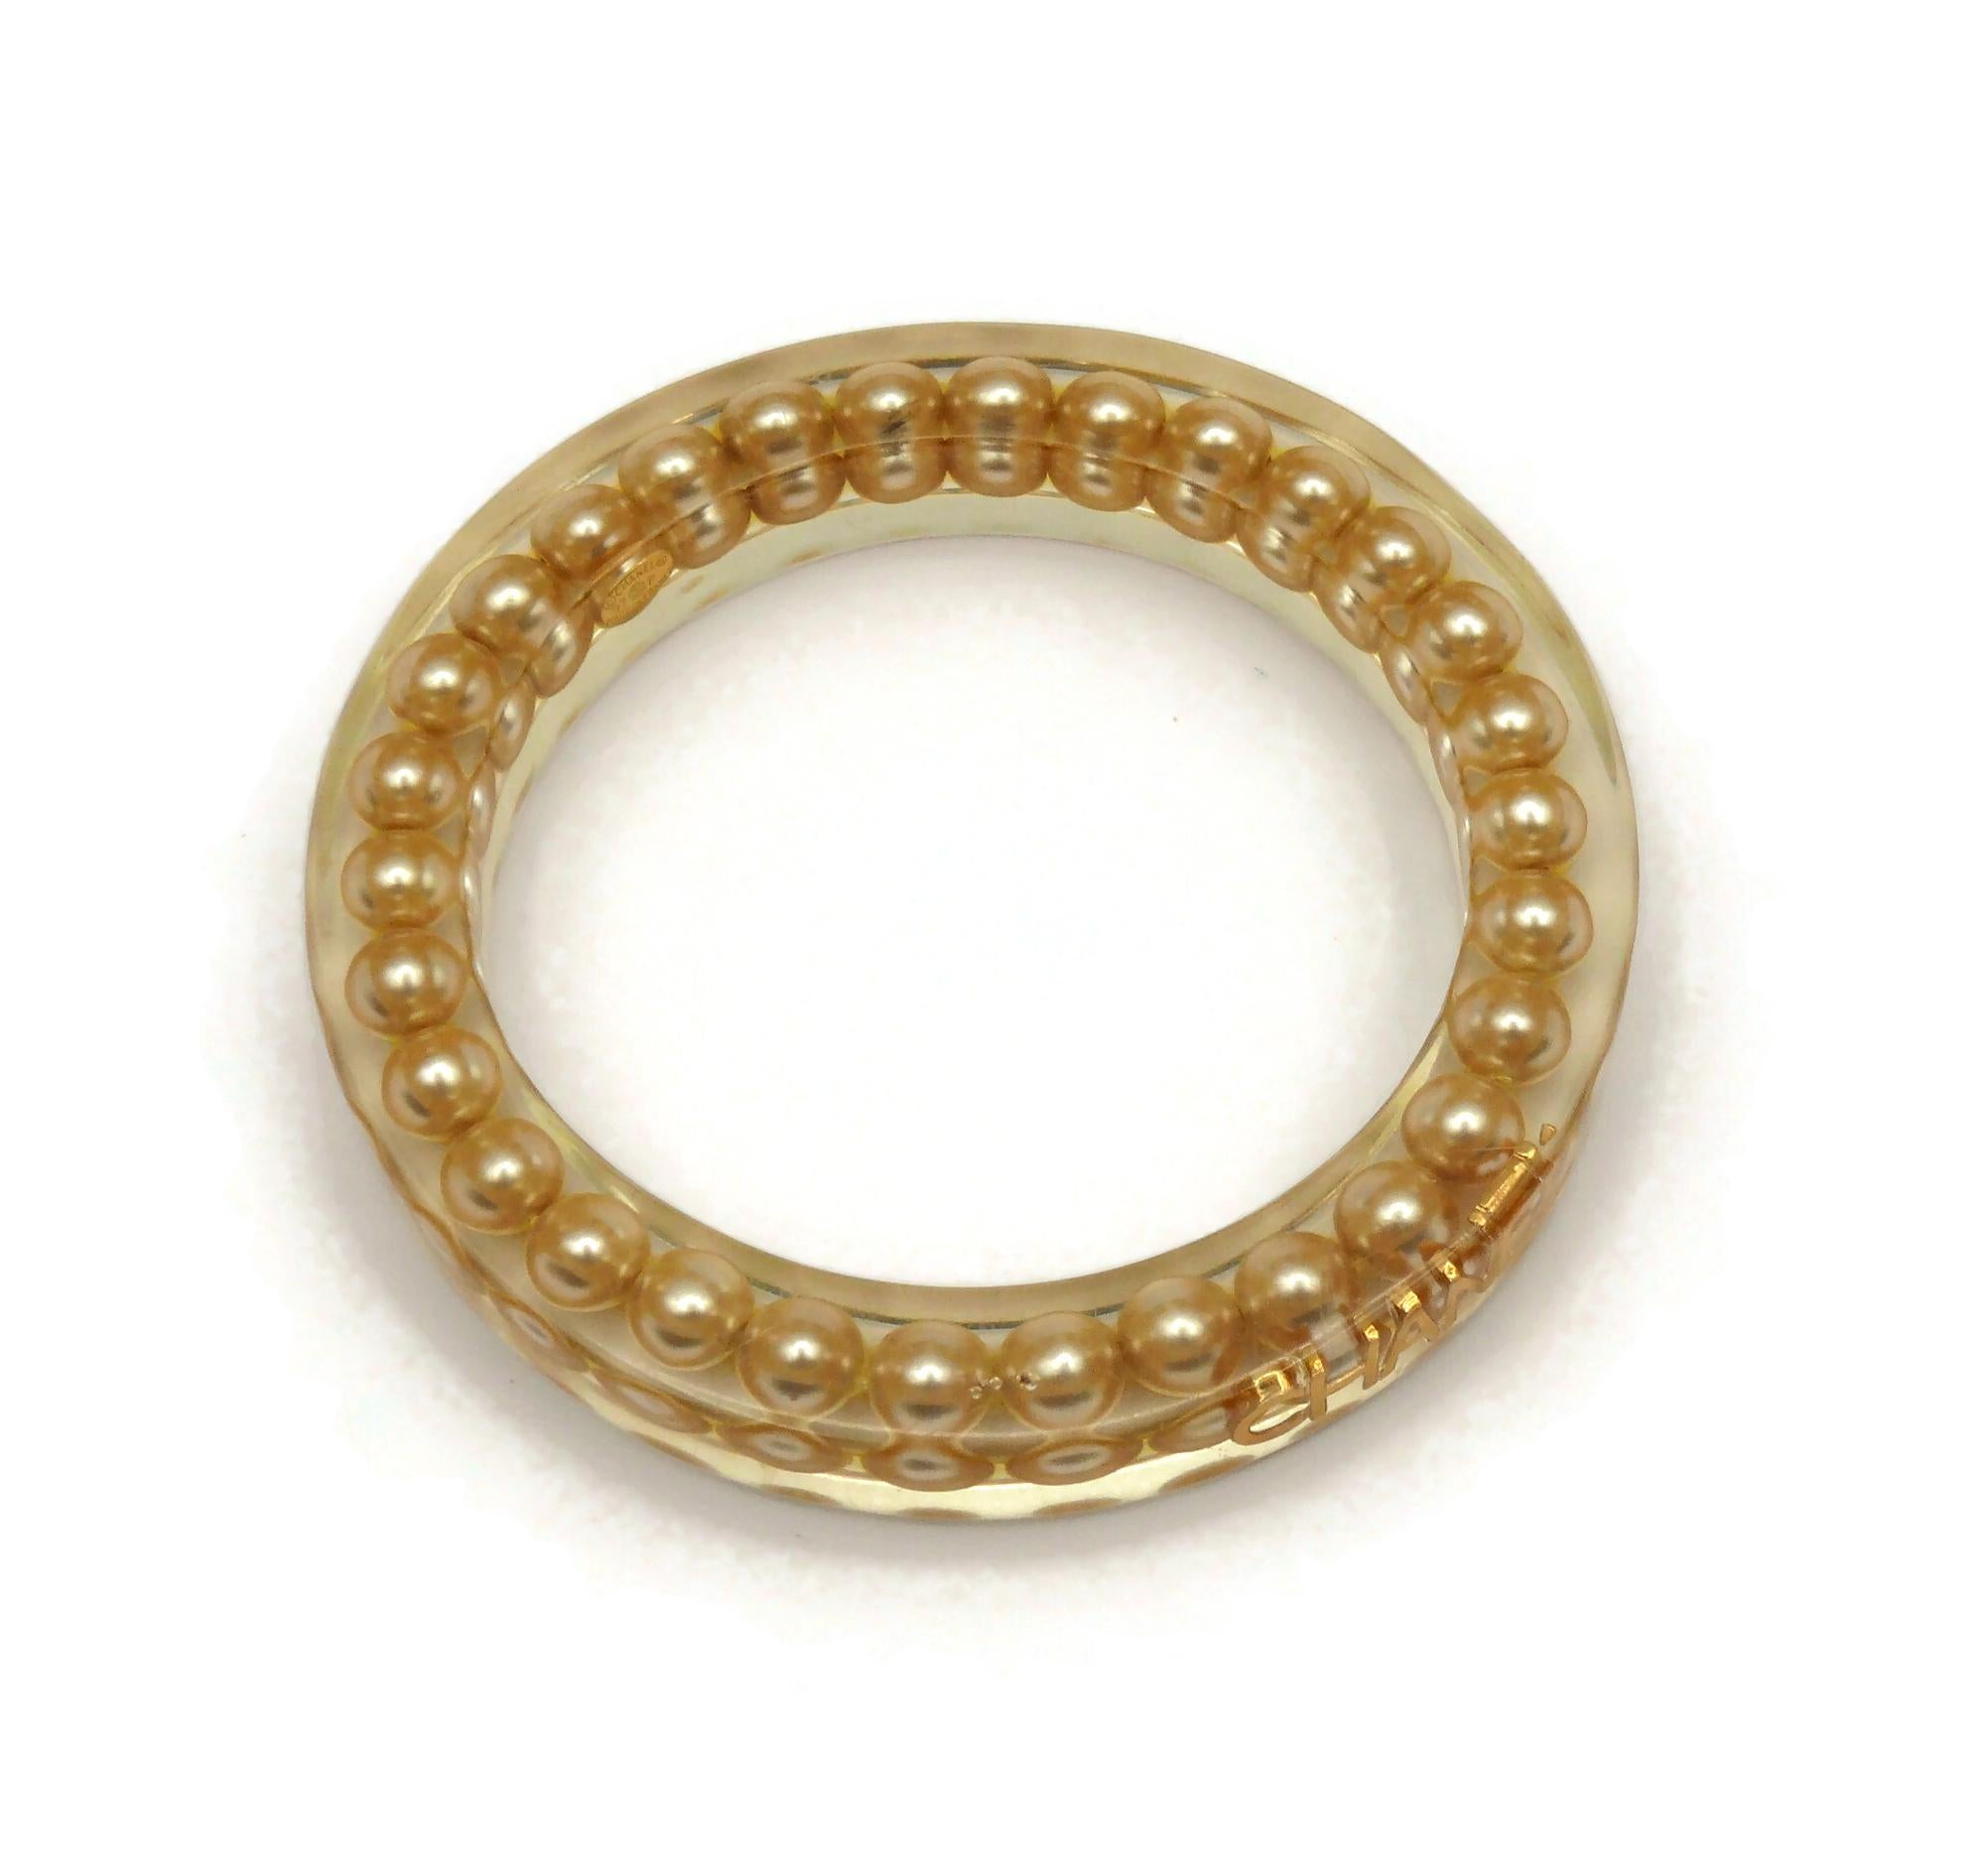 CHANEL by KARL LAGERFELD Vintage Lucite Pearl Inlaid Bangle, Spring 1997 For Sale 6